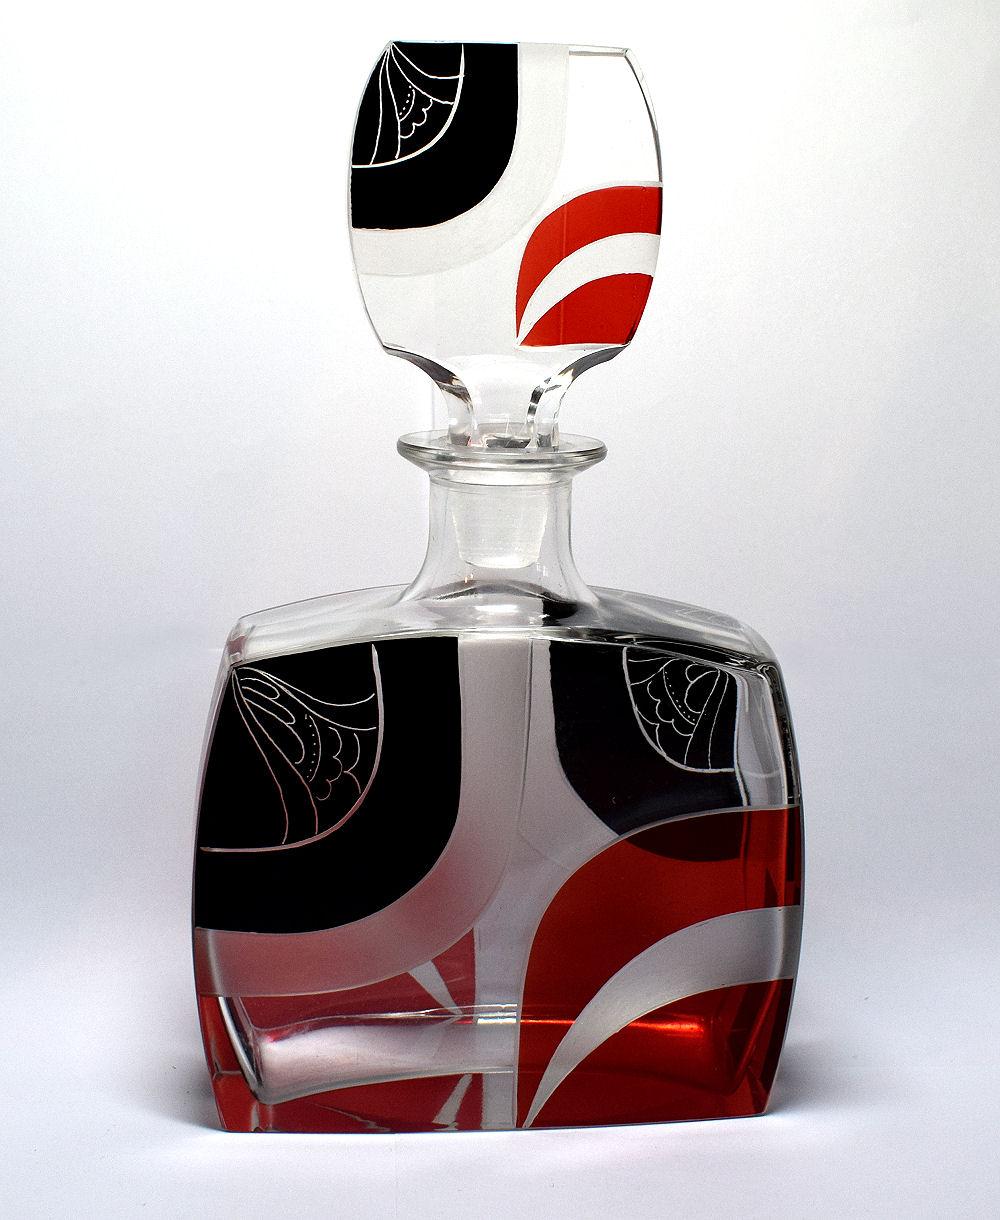 Very high quality, collectible 1930s Art Deco Czech decanter set by Karl Palda. Features the classic Karl Palda black and red geometric enamel decorations to each piece. These classic sets are rare and a beautiful addition to any deco collection. No